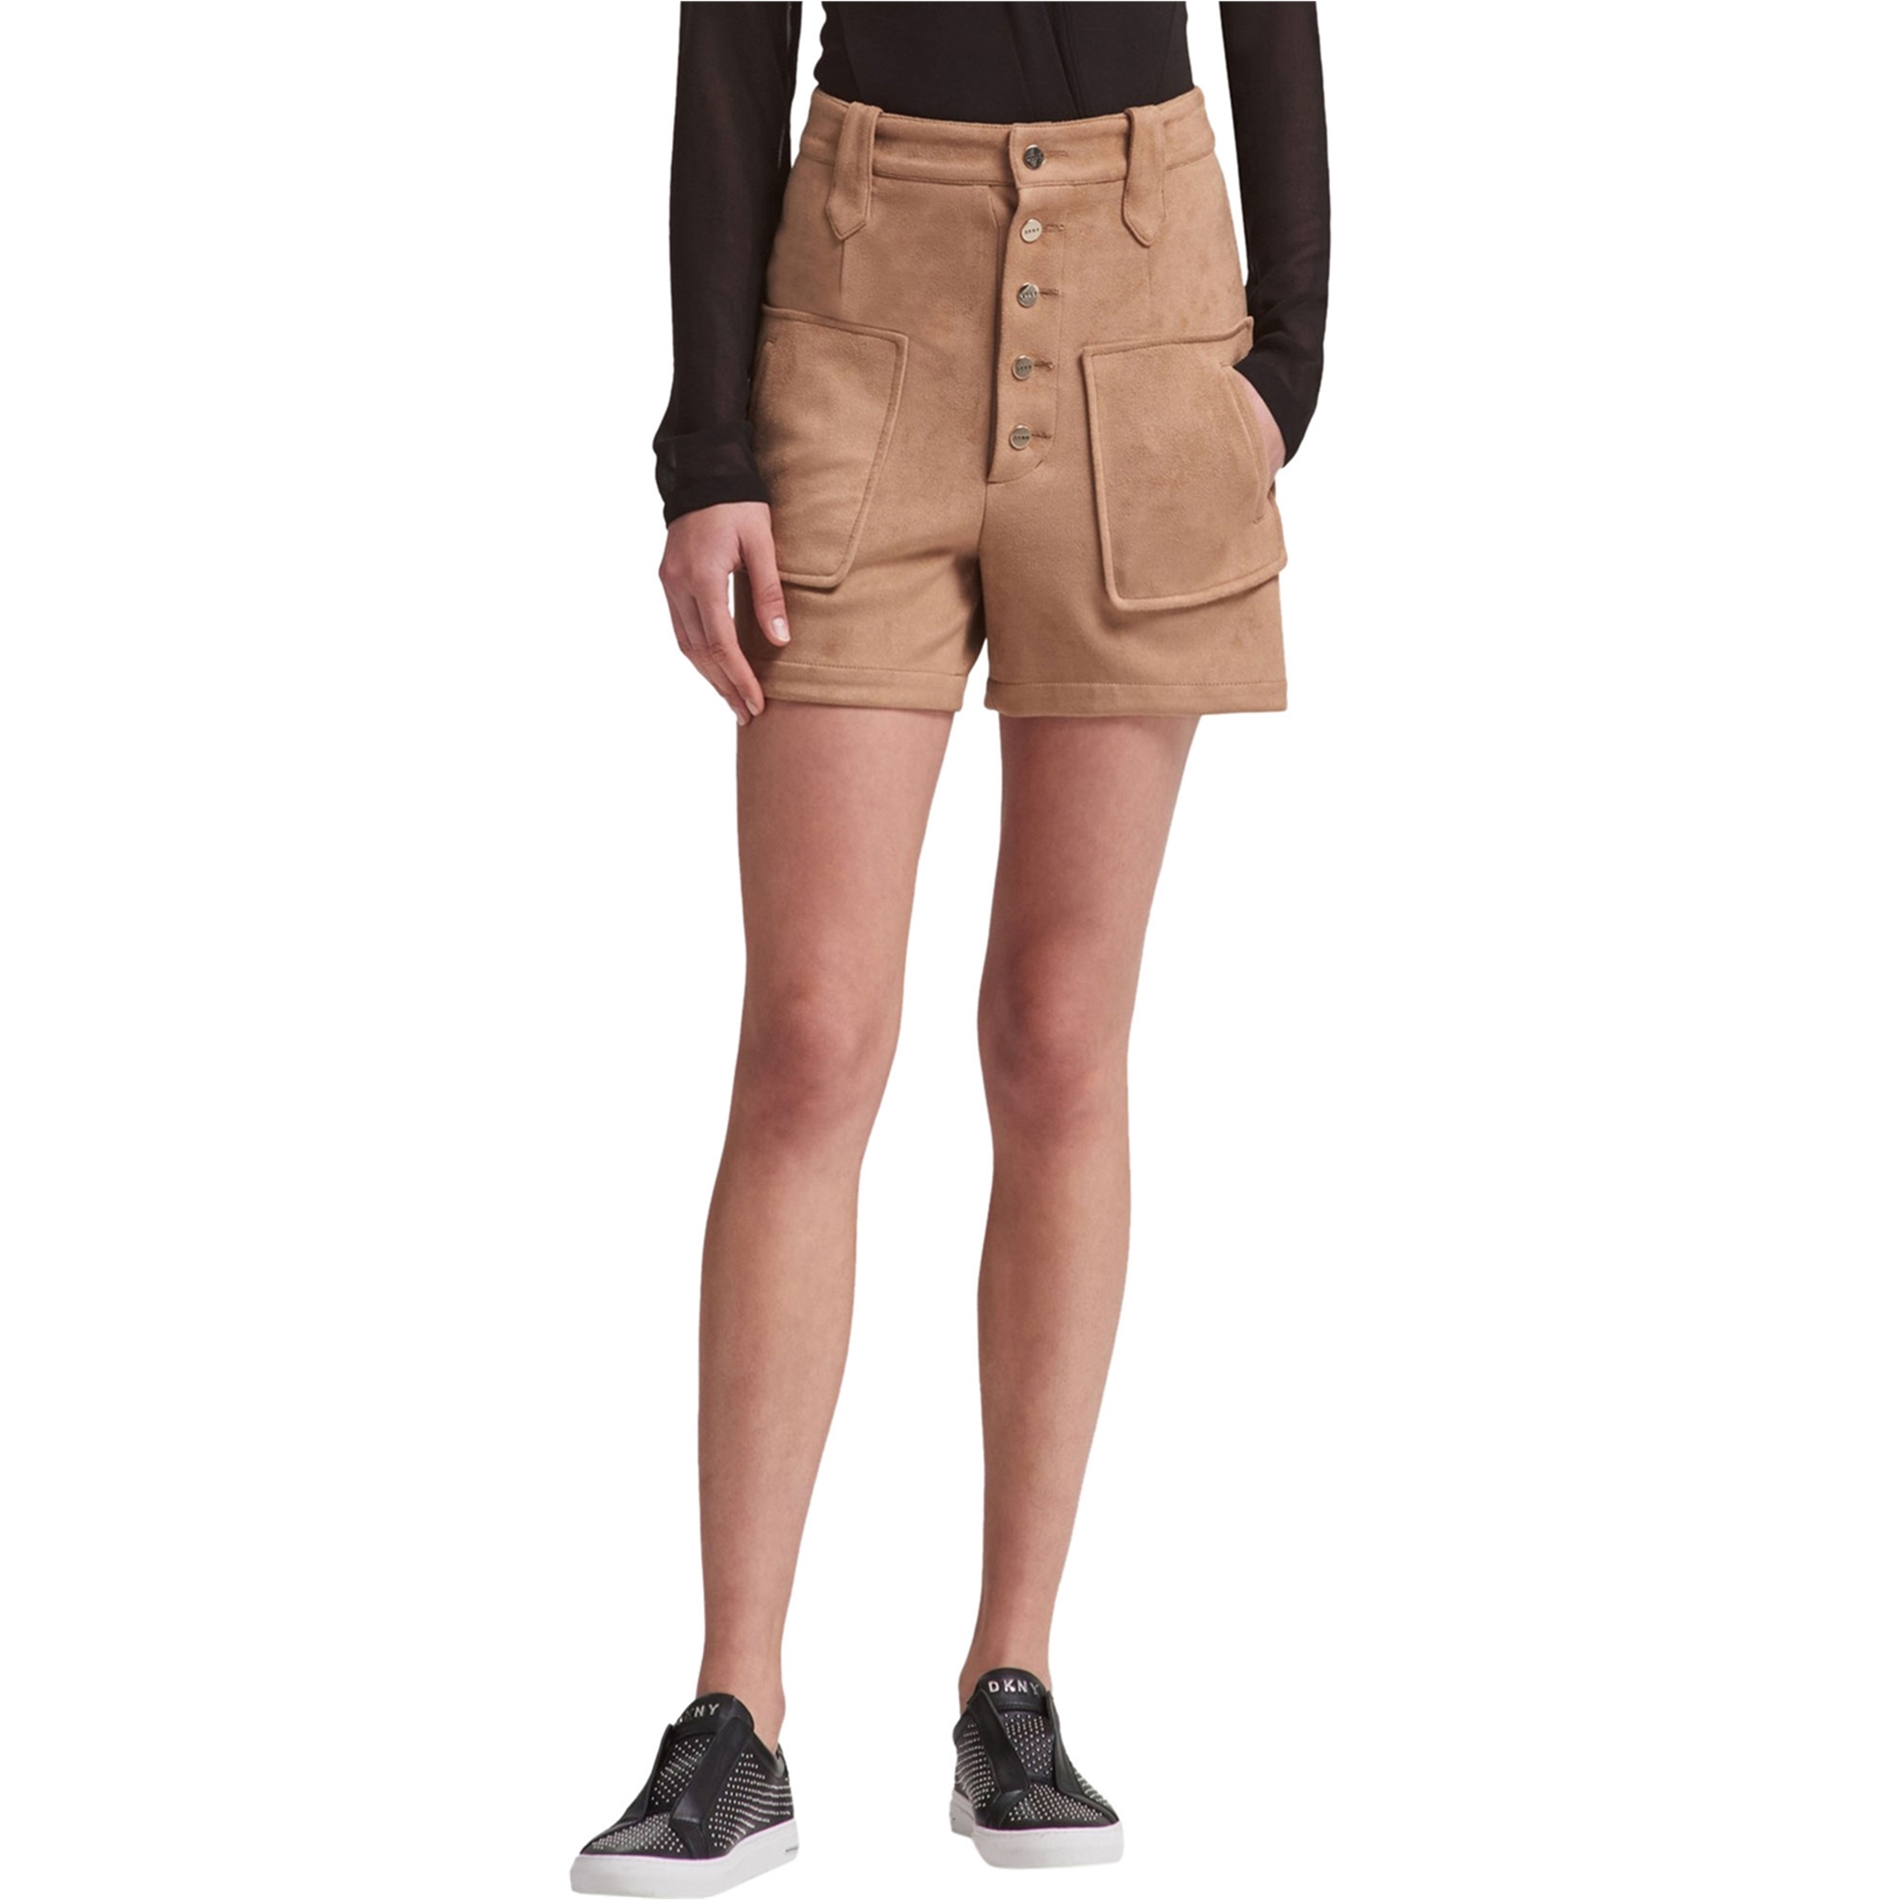 Dkny Womens Faux Suede Casual Walking Shorts